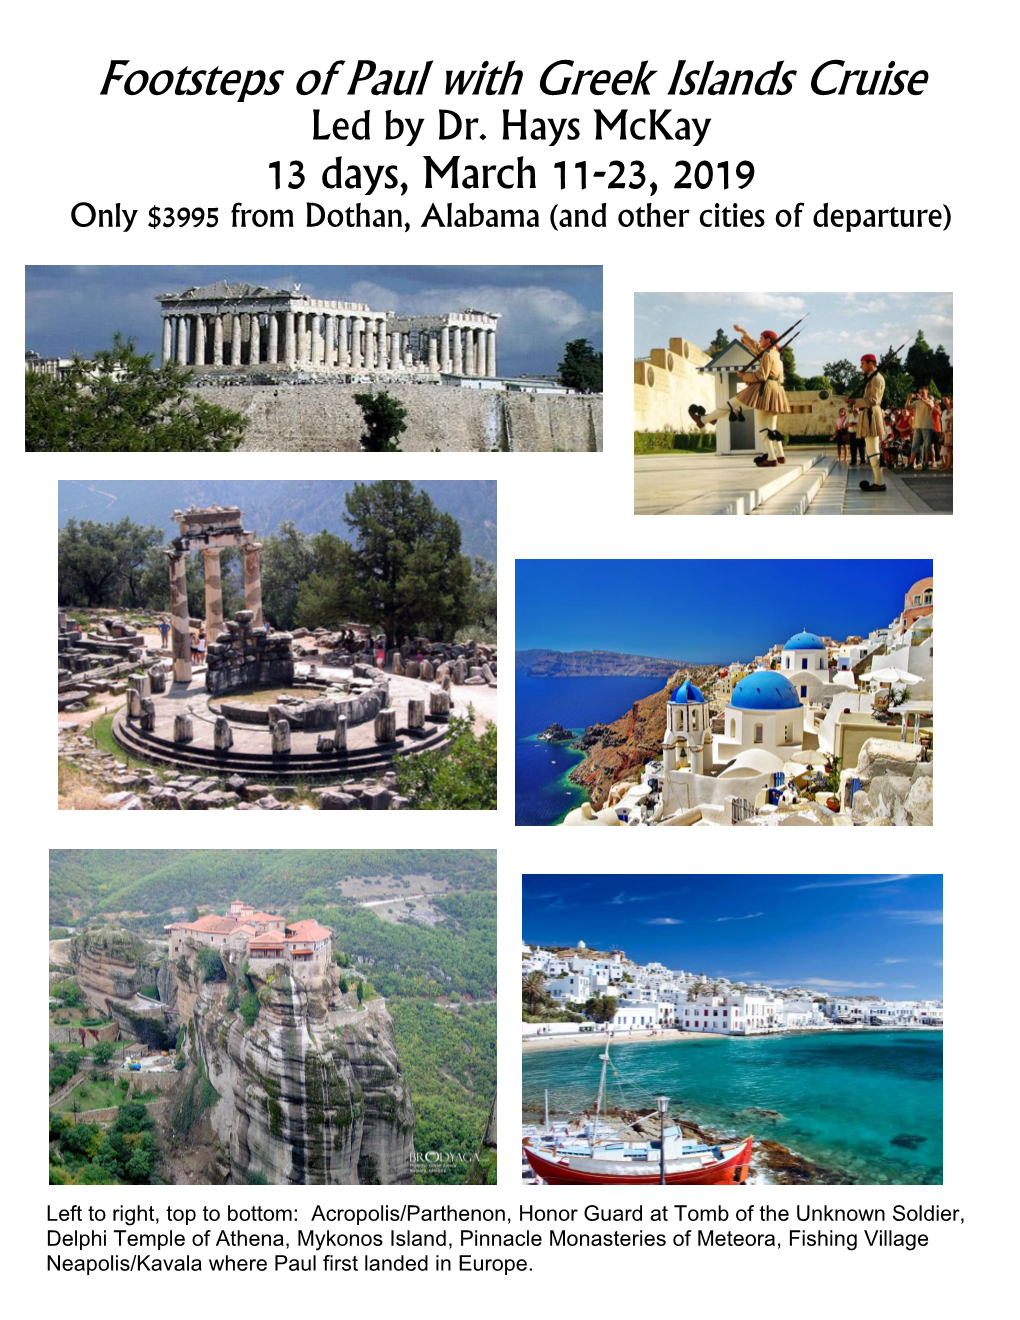 Footsteps of Paul with Greek Islands Cruise Led by Dr